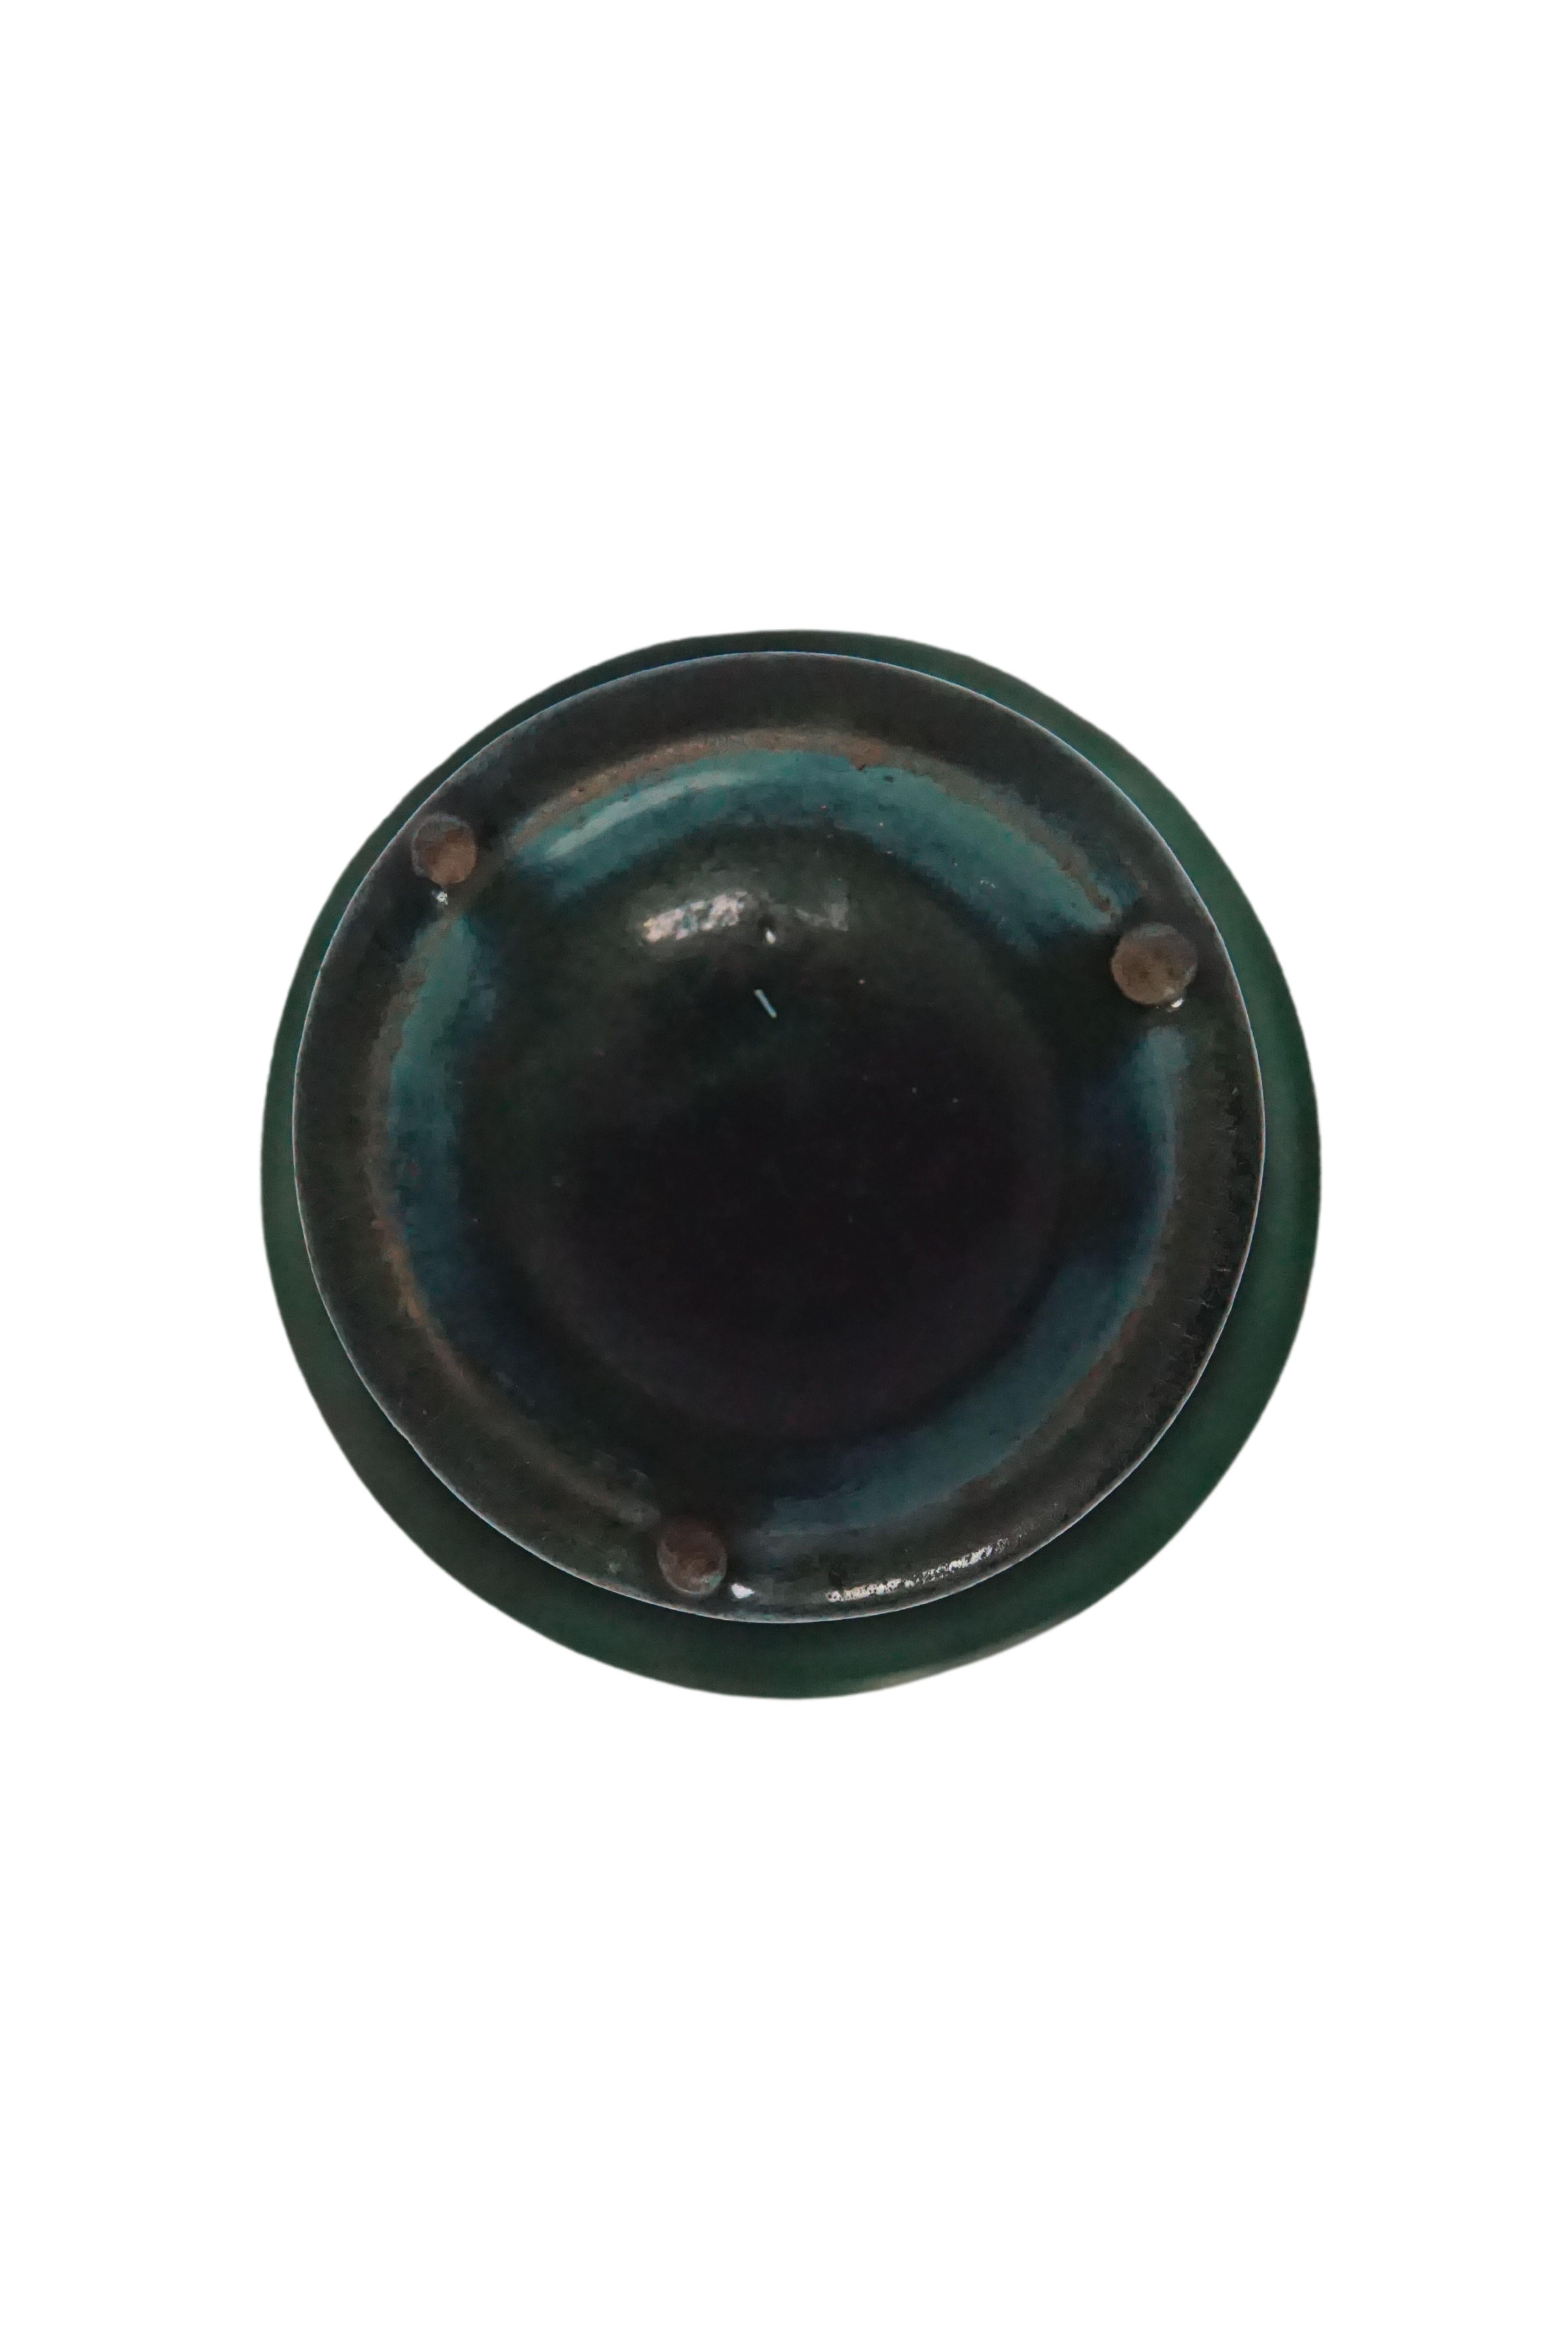 Chinoiserie Chinese Ceramic 'Shiwan' Oil Lamp / Candle Holder, Green Glaze, c. 1900 For Sale